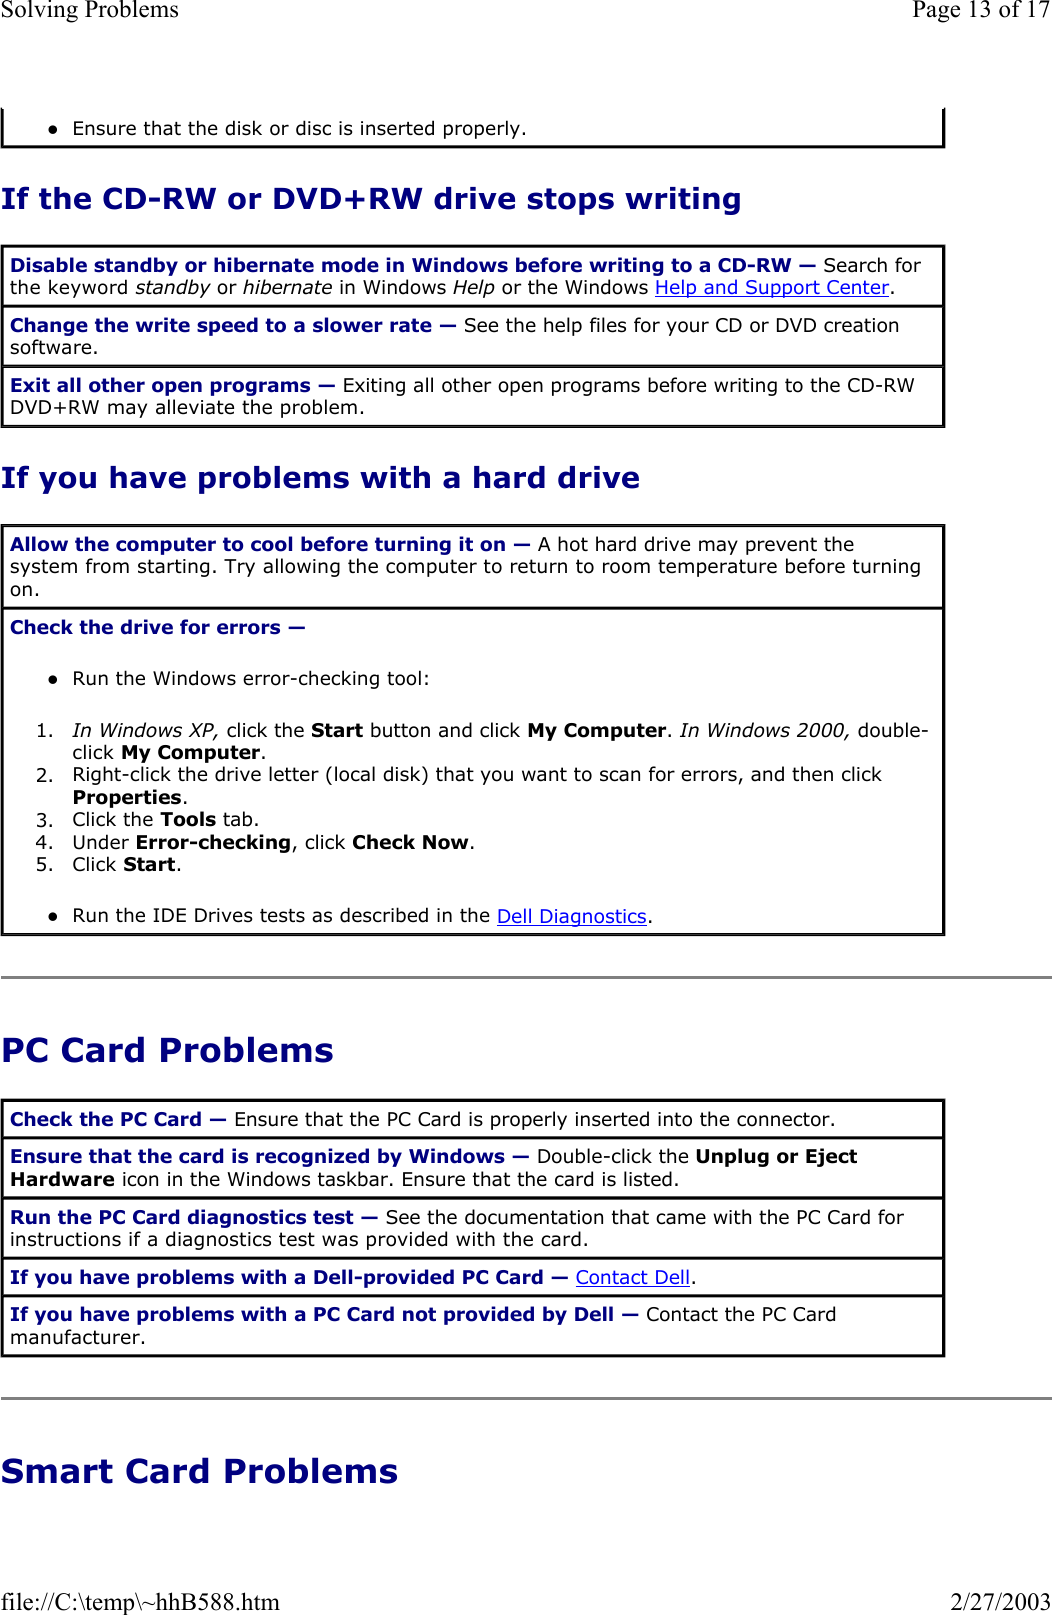 If the CD-RW or DVD+RW drive stops writing If you have problems with a hard drive PC Card Problems Smart Card Problems zEnsure that the disk or disc is inserted properly.  Disable standby or hibernate mode in Windows before writing to a CD-RW — Search for the keyword standby or hibernate in Windows Help or the Windows Help and Support Center. Change the write speed to a slower rate — See the help files for your CD or DVD creation software. Exit all other open programs — Exiting all other open programs before writing to the CD-RW DVD+RW may alleviate the problem. Allow the computer to cool before turning it on — A hot hard drive may prevent the system from starting. Try allowing the computer to return to room temperature before turning on. Check the drive for errors —  zRun the Windows error-checking tool:  1. In Windows XP, click the Start button and click My Computer. In Windows 2000, double-click My Computer.  2. Right-click the drive letter (local disk) that you want to scan for errors, and then click Properties.  3. Click the Tools tab.  4. Under Error-checking, click Check Now.  5. Click Start.  zRun the IDE Drives tests as described in the Dell Diagnostics.  Check the PC Card — Ensure that the PC Card is properly inserted into the connector. Ensure that the card is recognized by Windows — Double-click the Unplug or Eject Hardware icon in the Windows taskbar. Ensure that the card is listed. Run the PC Card diagnostics test — See the documentation that came with the PC Card for instructions if a diagnostics test was provided with the card. If you have problems with a Dell-provided PC Card — Contact Dell. If you have problems with a PC Card not provided by Dell — Contact the PC Card manufacturer. Page 13 of 17Solving Problems2/27/2003file://C:\temp\~hhB588.htm